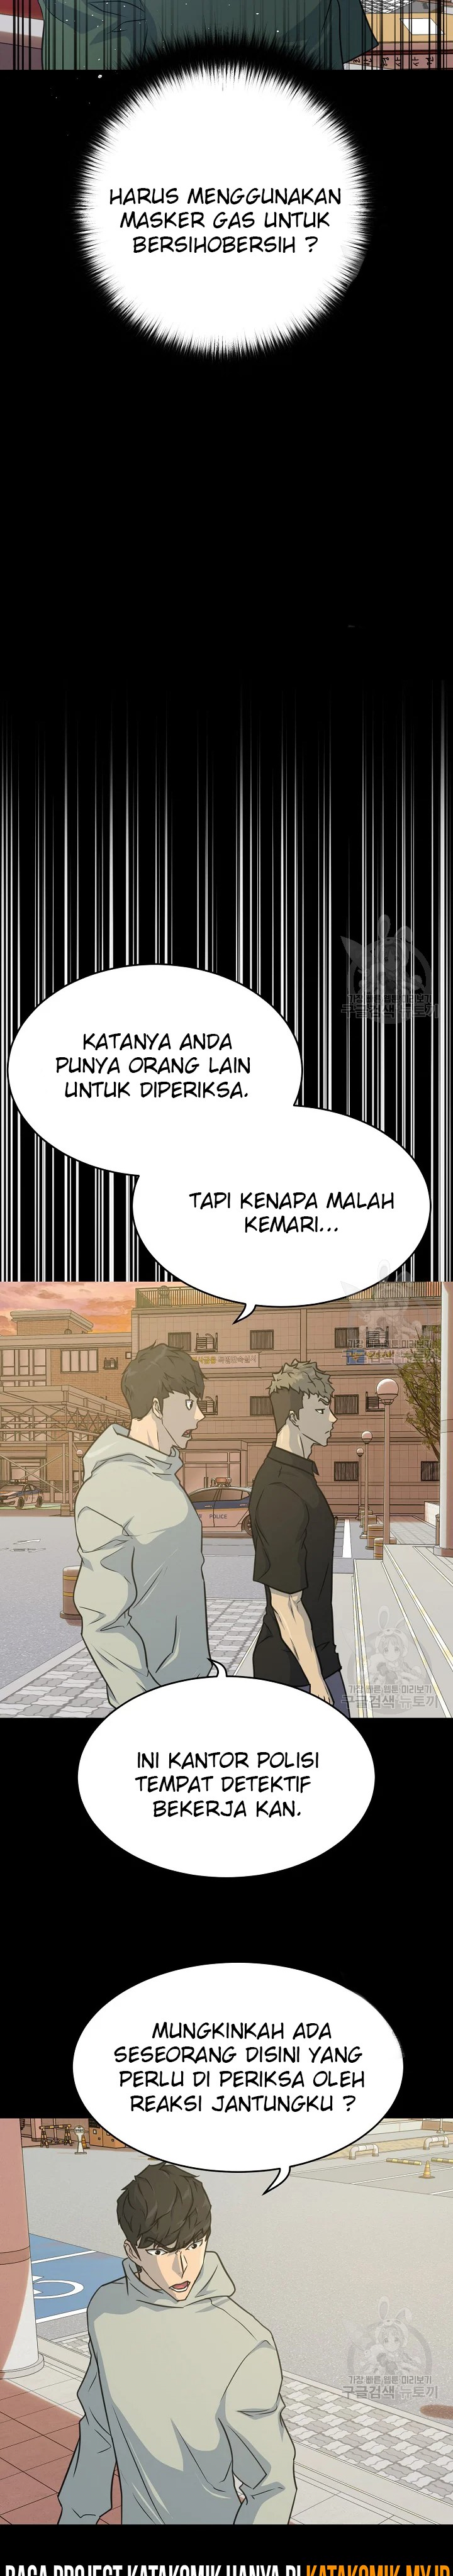 Trigger Chapter 103